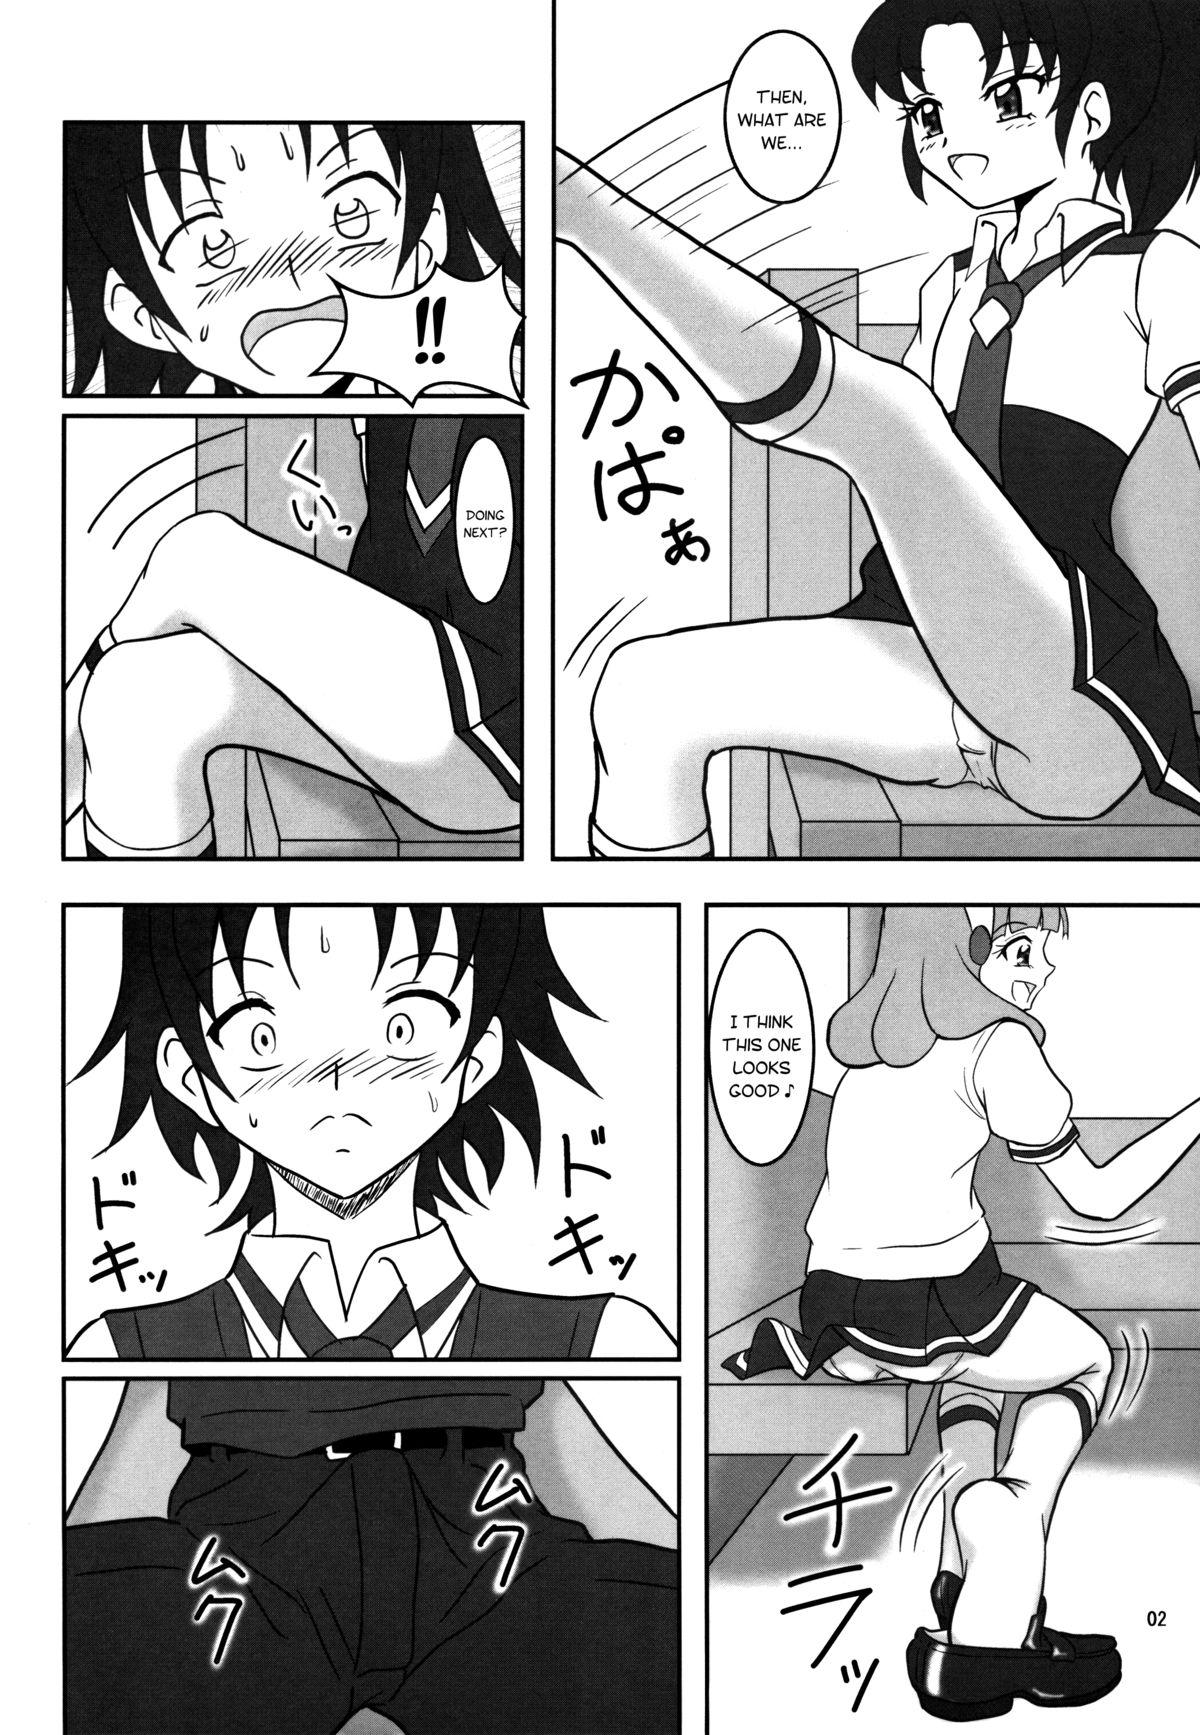 Assfucked Smell Zuricure | Smell Footycure - Smile precure Francais - Page 3